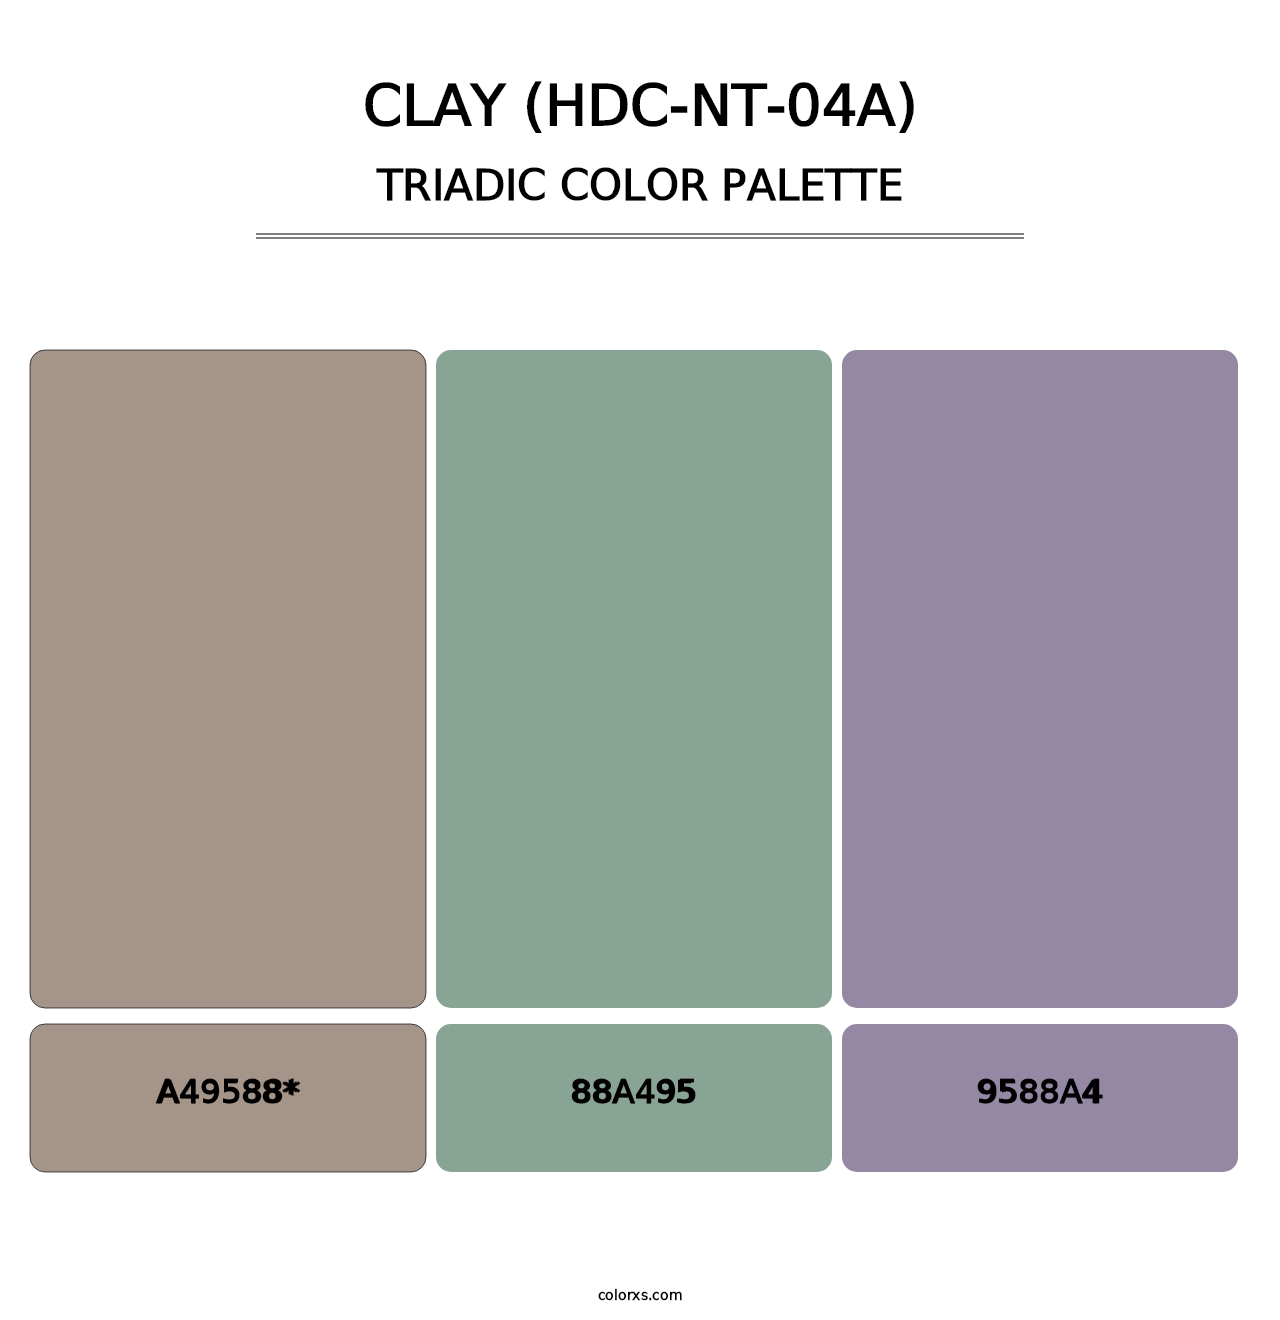 Clay (HDC-NT-04A) - Triadic Color Palette